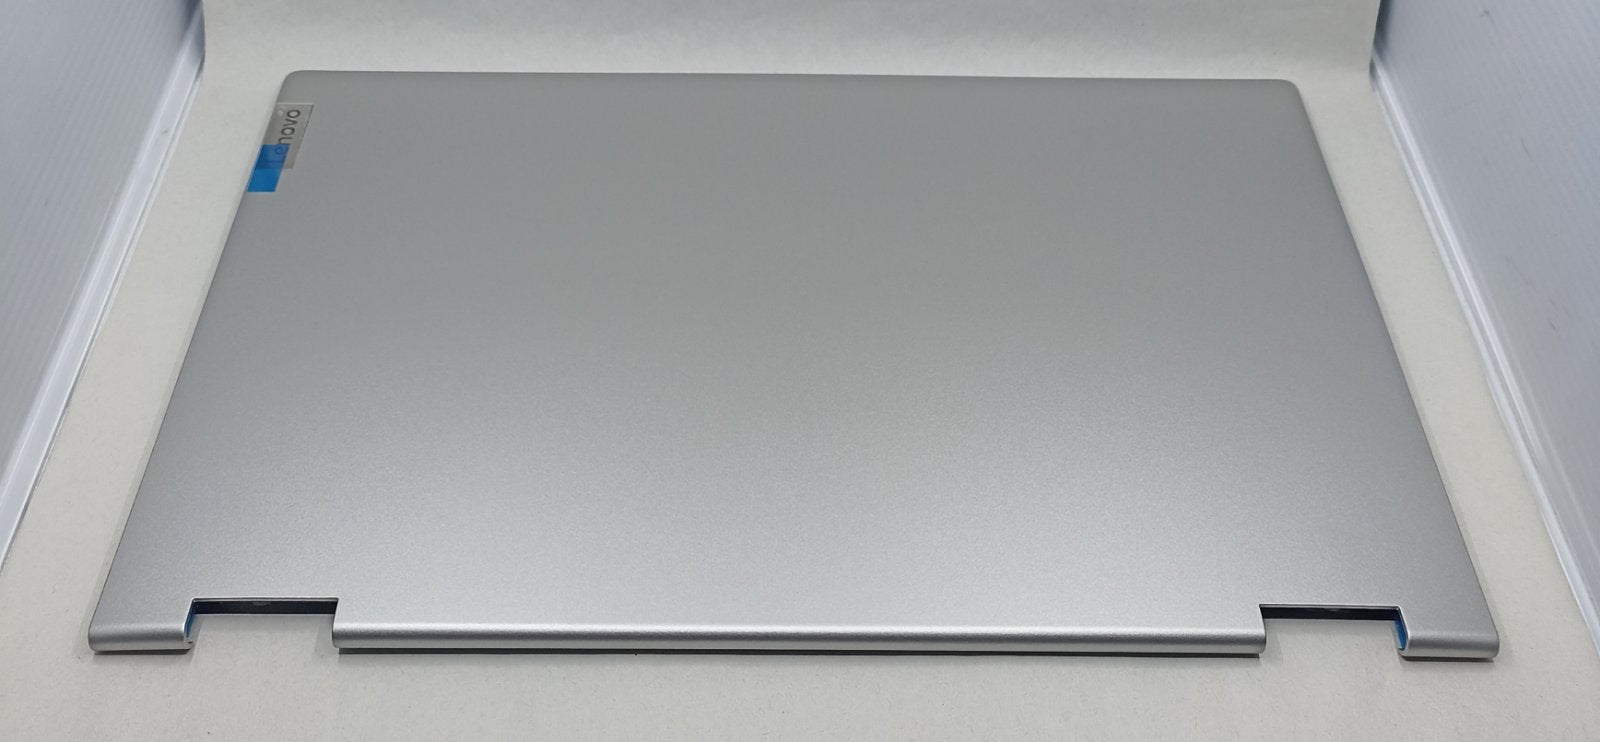 Replacement LCD Cover For Lenovo Flex 5-14ARE05 WL